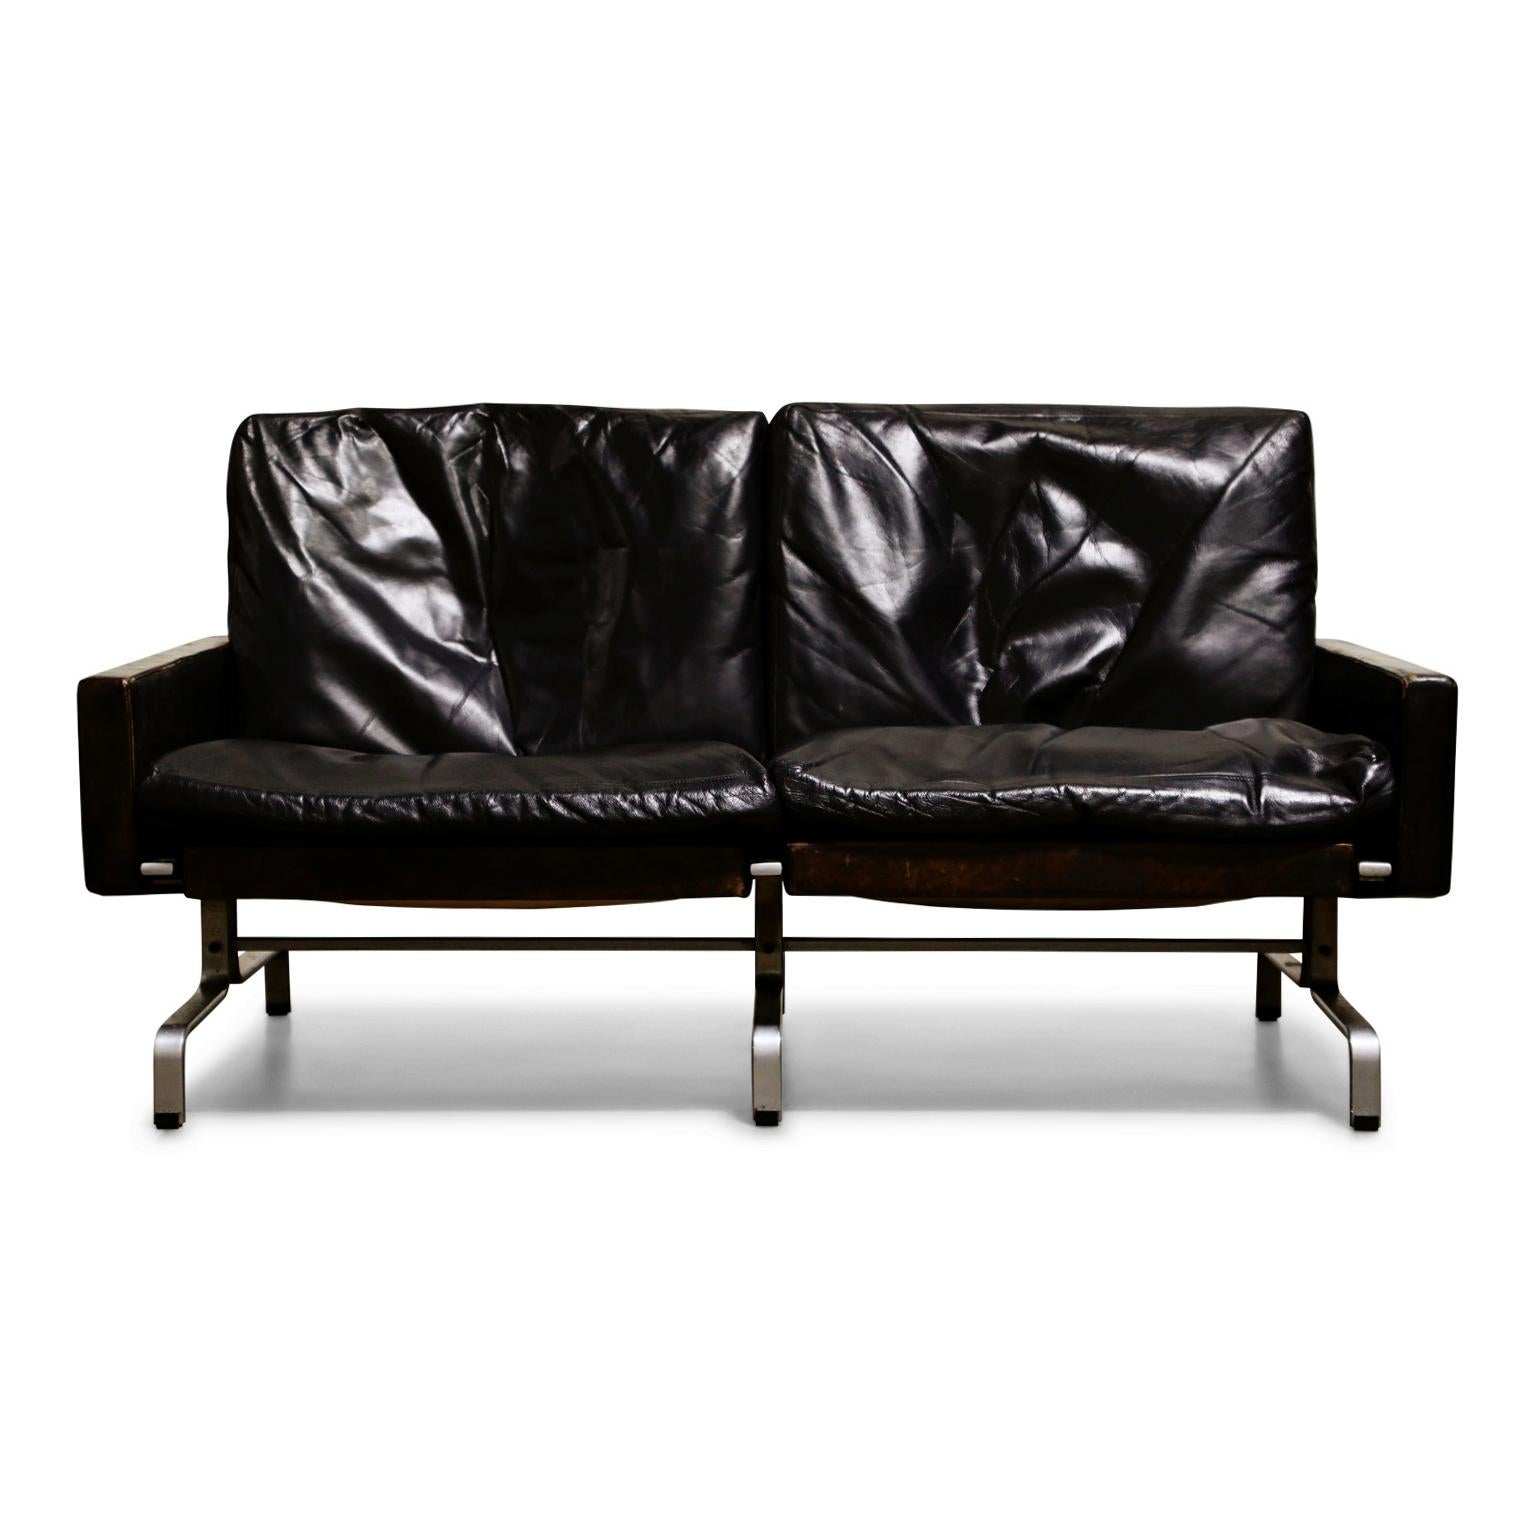 This highly collected and coveted early production example PK 31 loveseat by Poul Kjærholm for E. Kold Christensen has lovely aged black leather. Designed and produced in the 1960s in Denmark, Poul Kjaerholm was well known for precision engineering